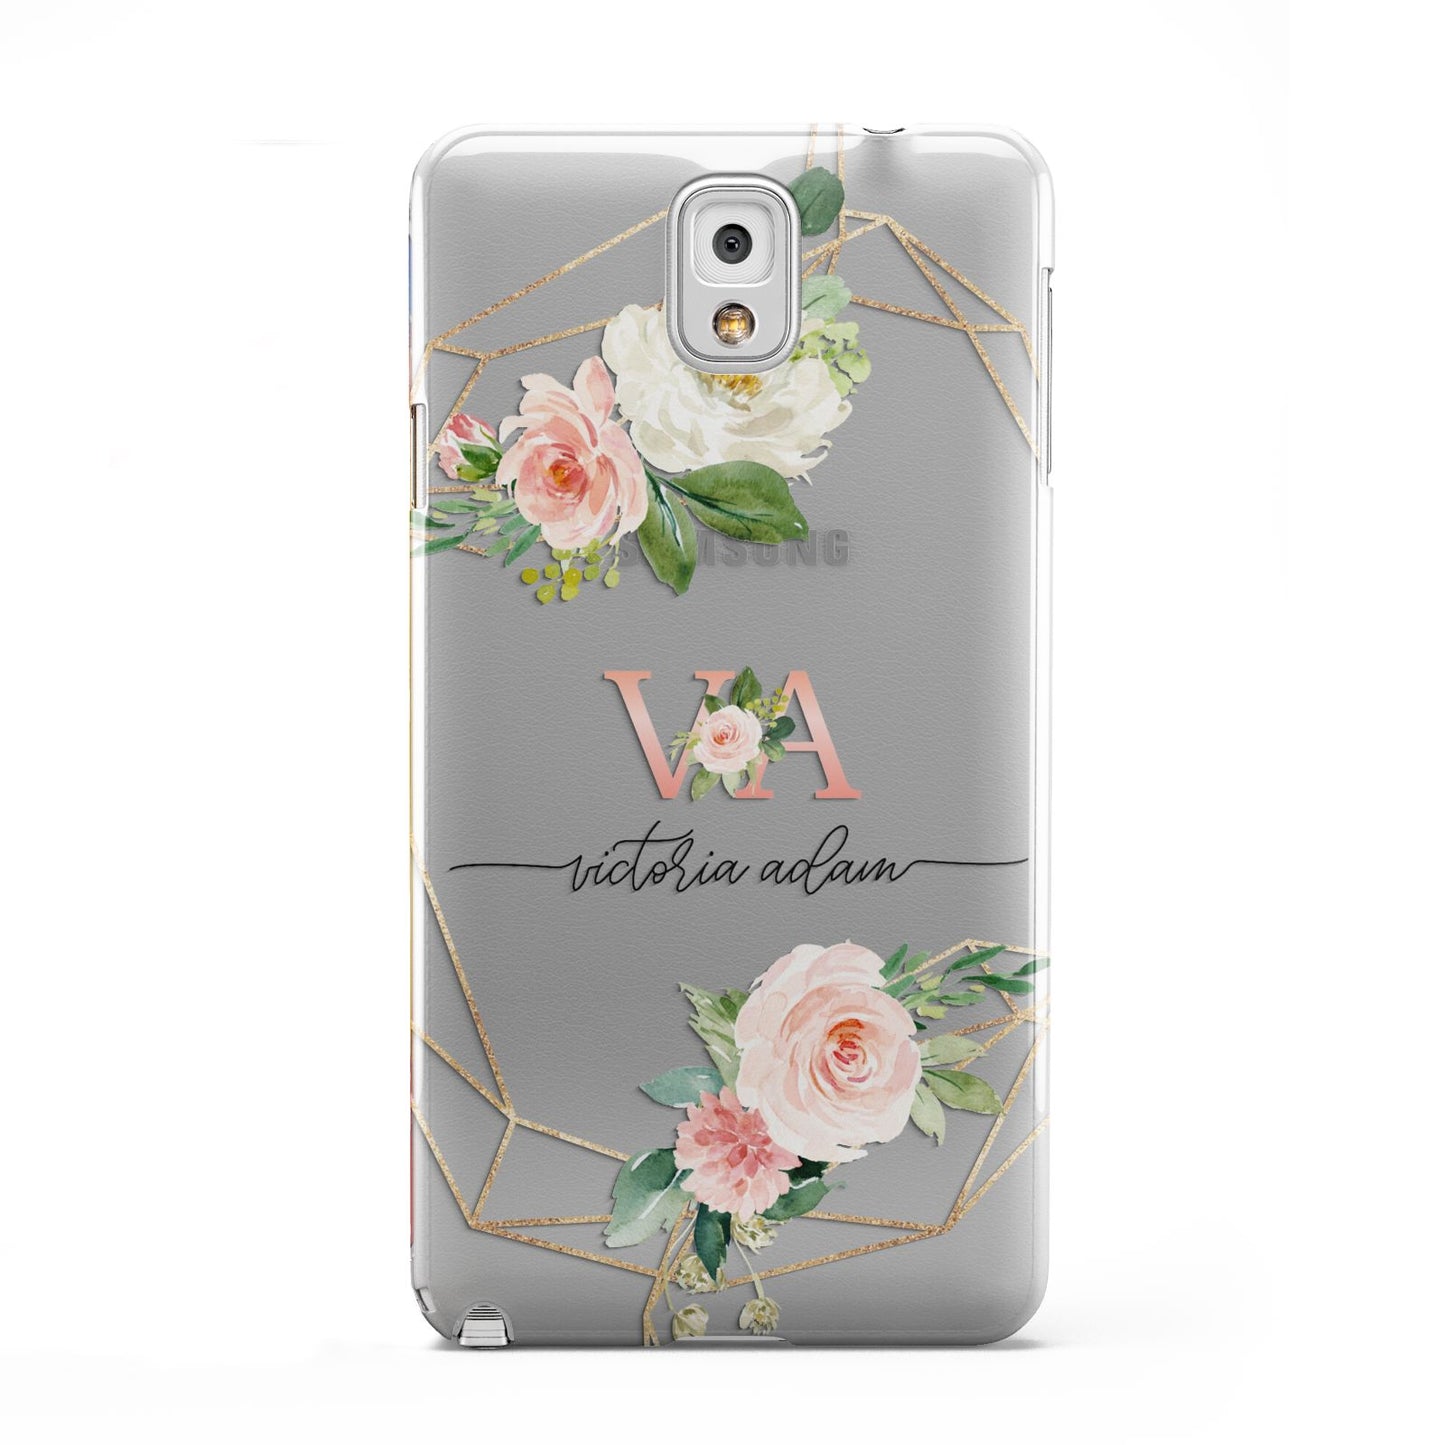 Blush Pink Rose Floral Personalised Samsung Galaxy Note 3 Case